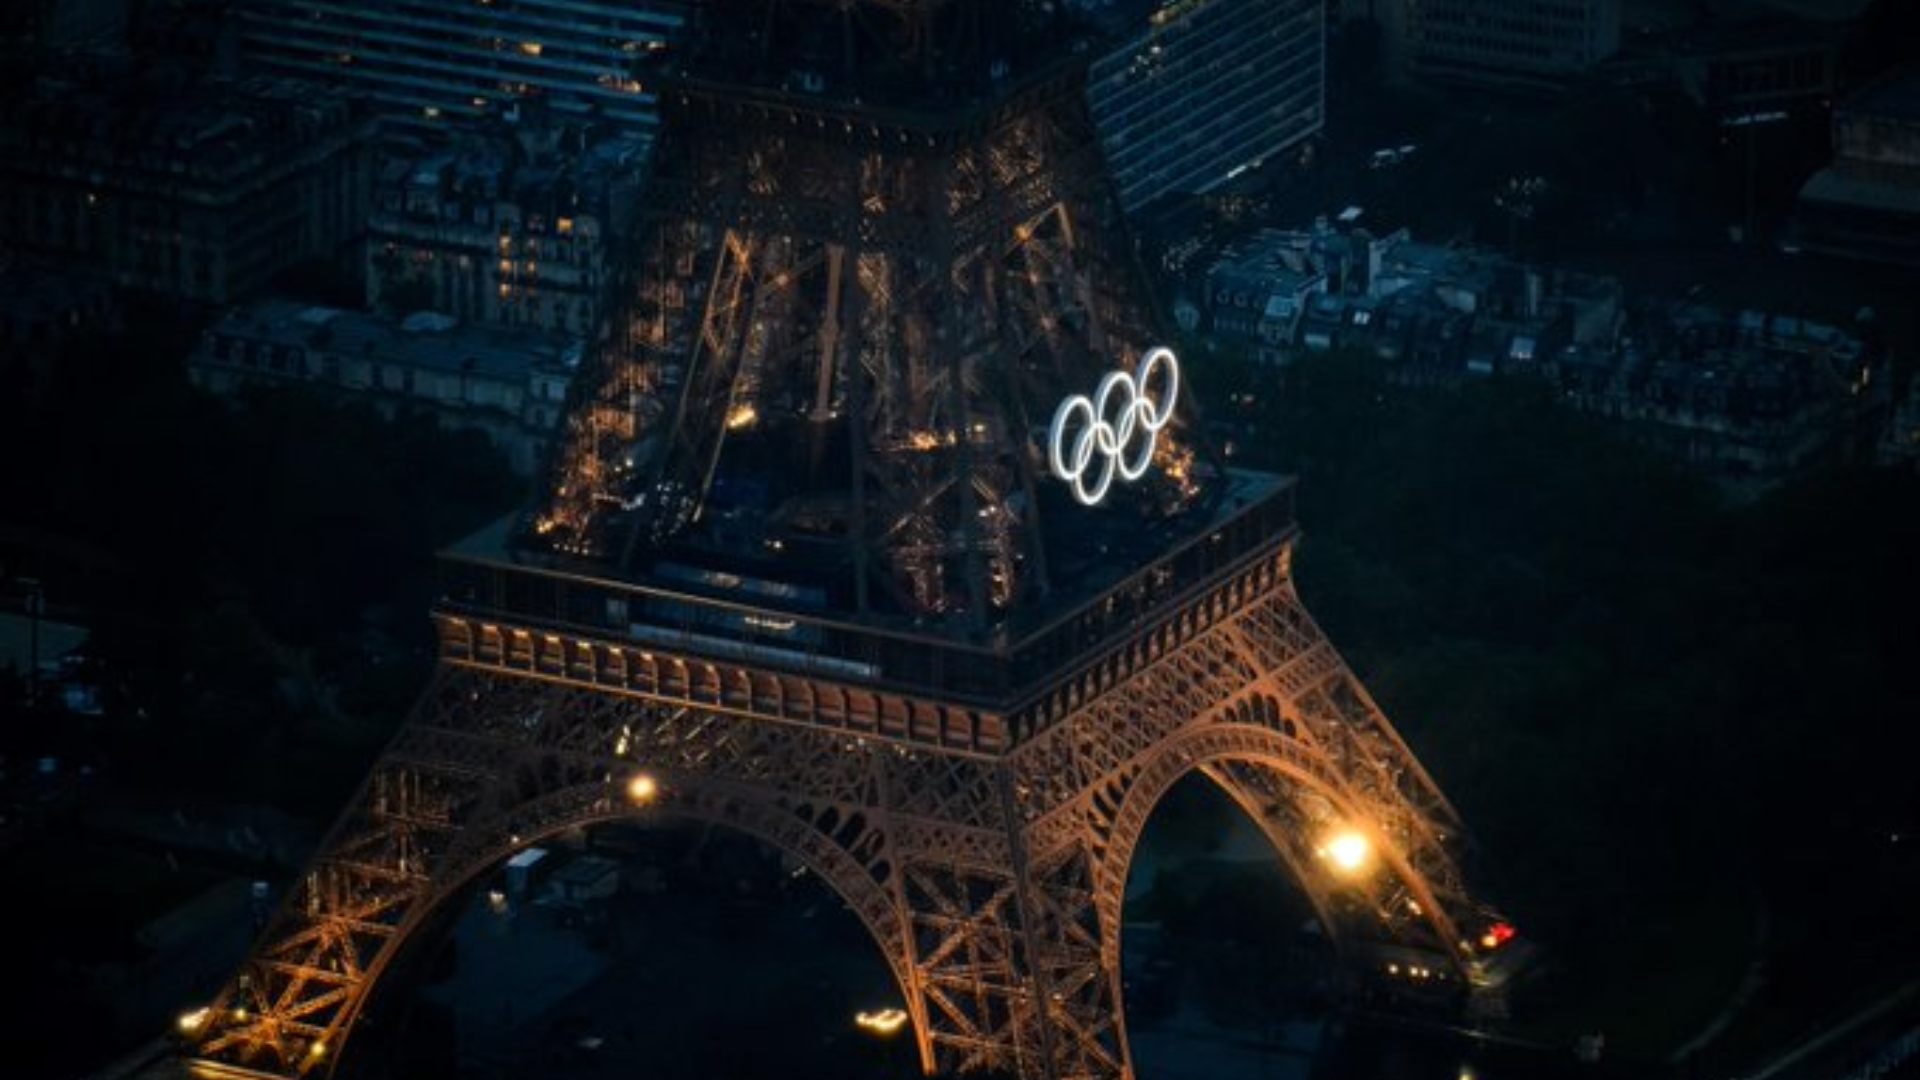 Paris Olympics 2024: Takeaways From Opening Ceremony, From Surprises To Performances